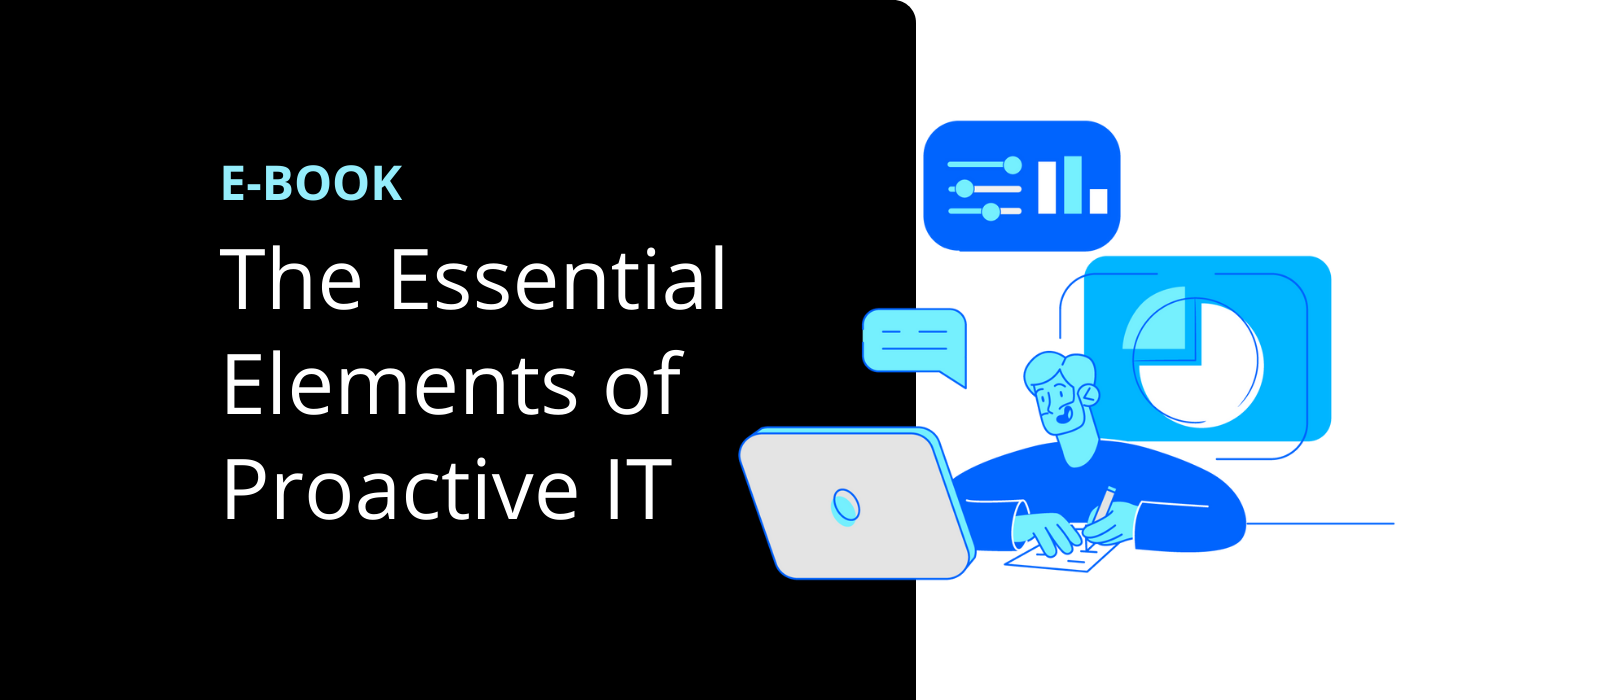 Graphic for the e-book, The Essential Elements of Proactive IT.